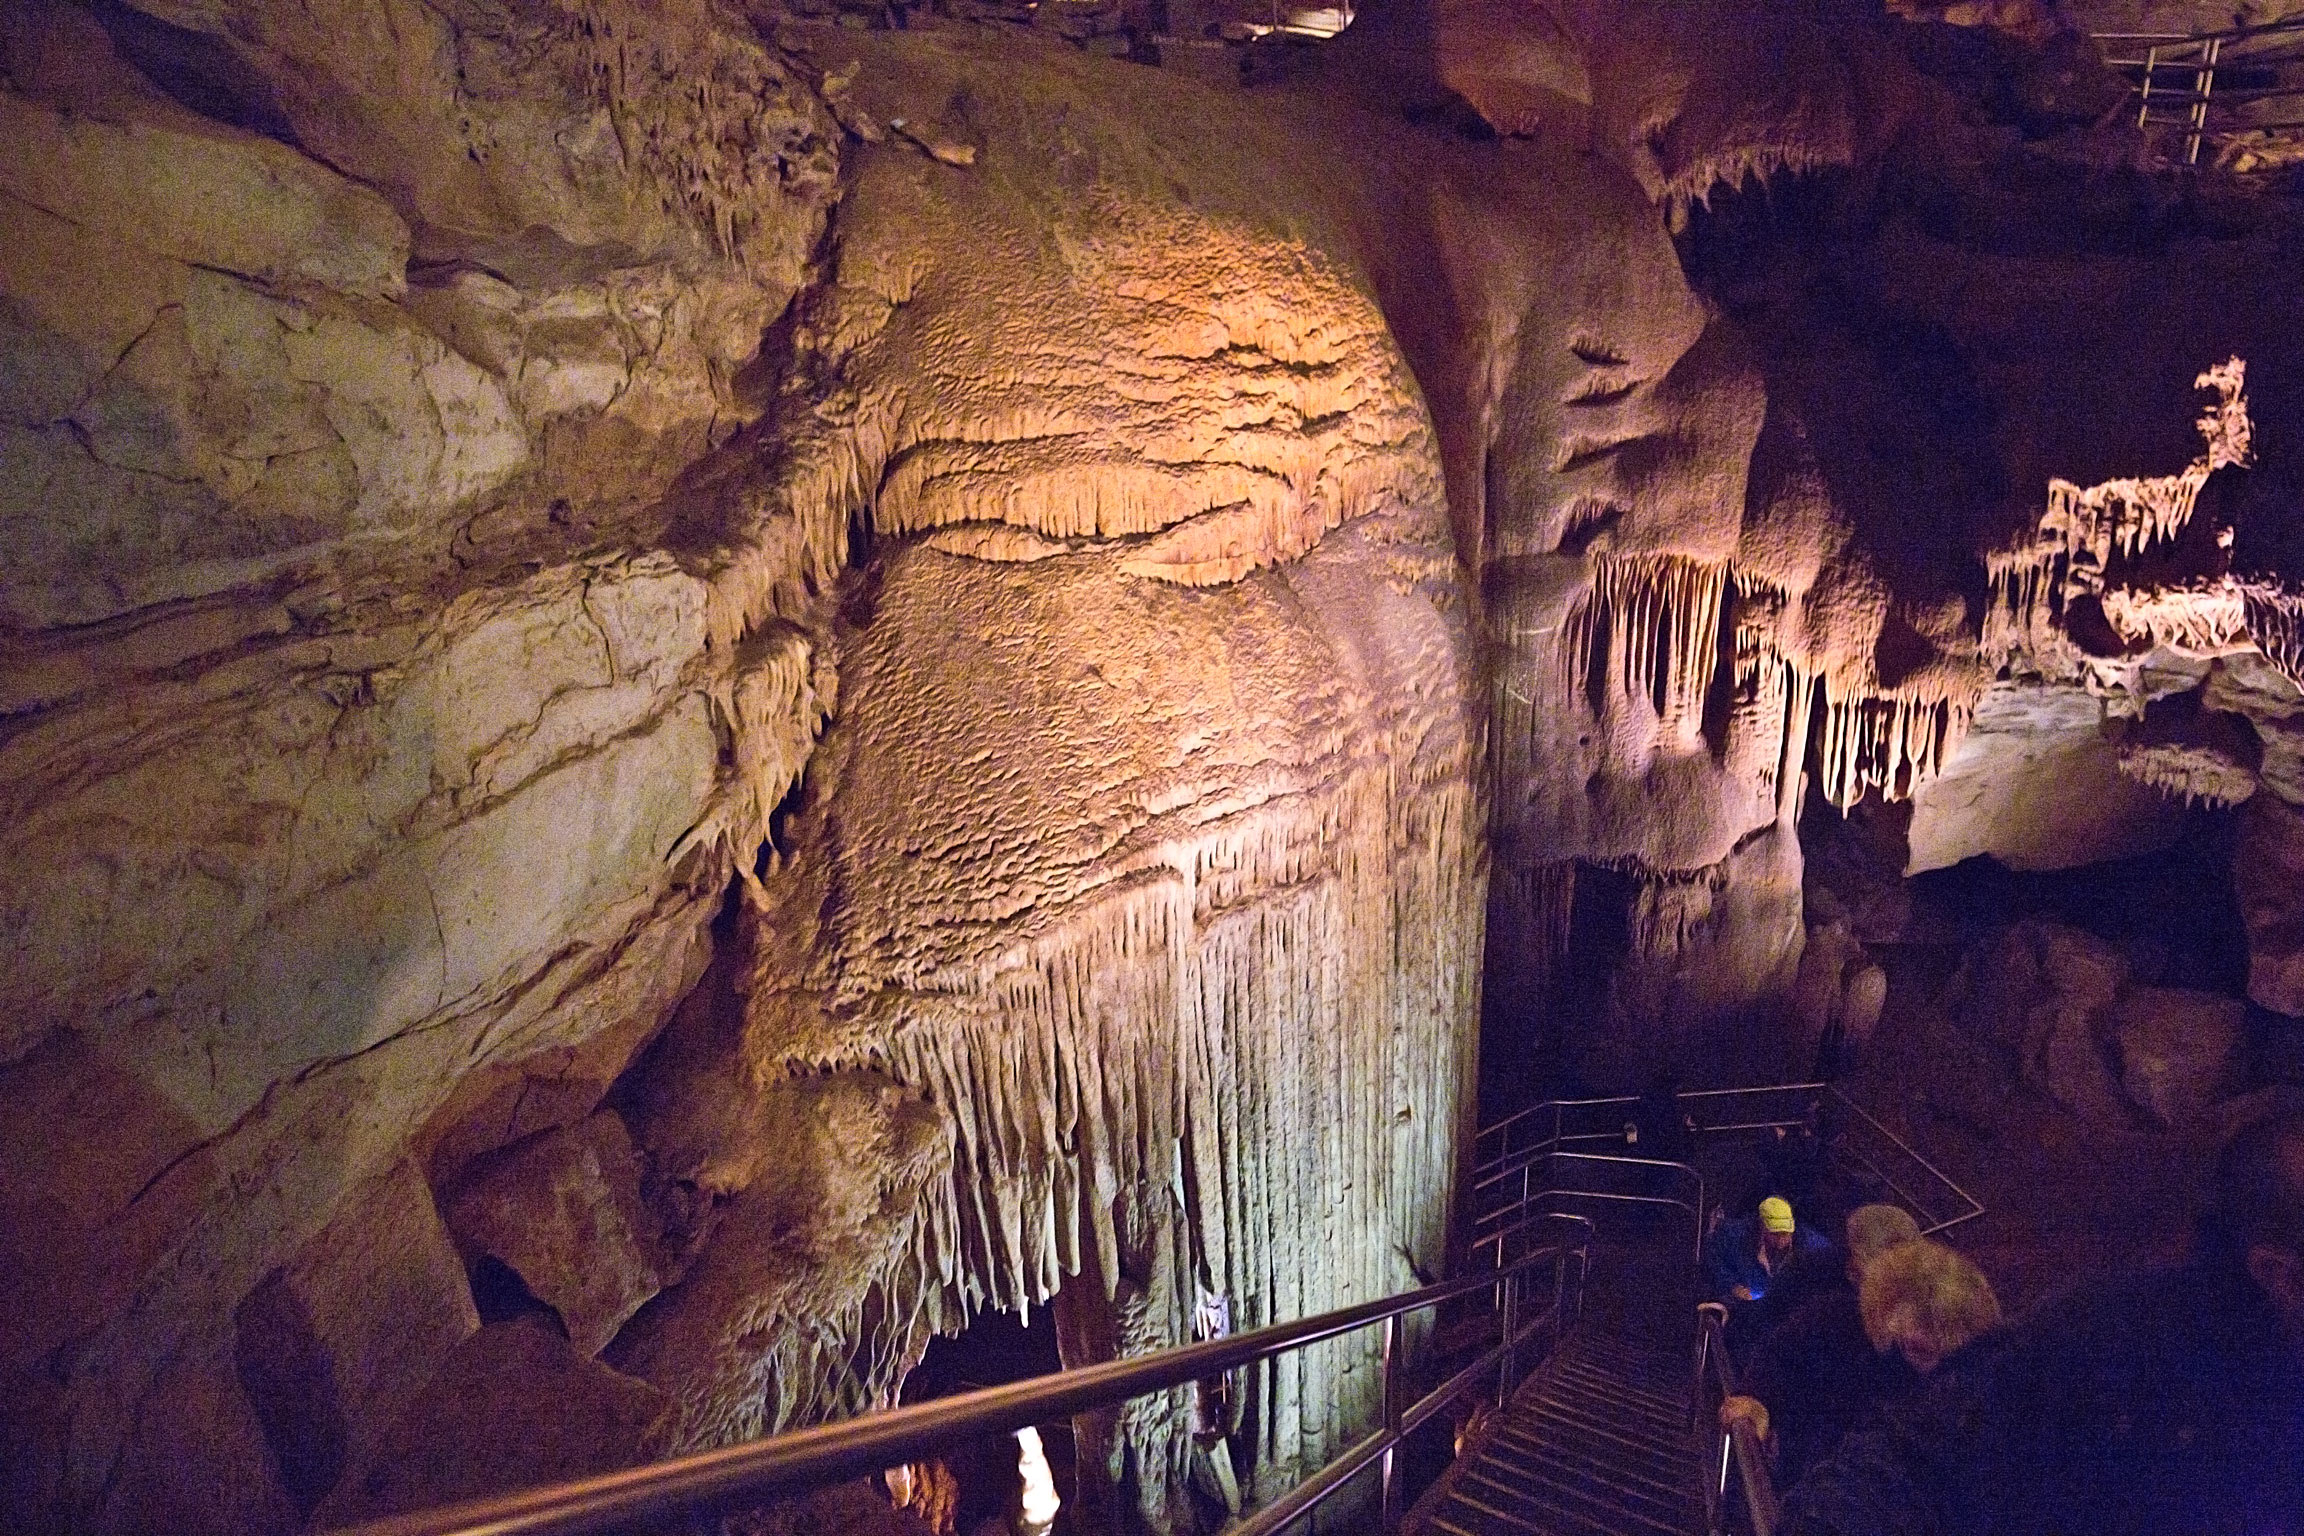 Walkway to the Frozen Niagra Cave formation